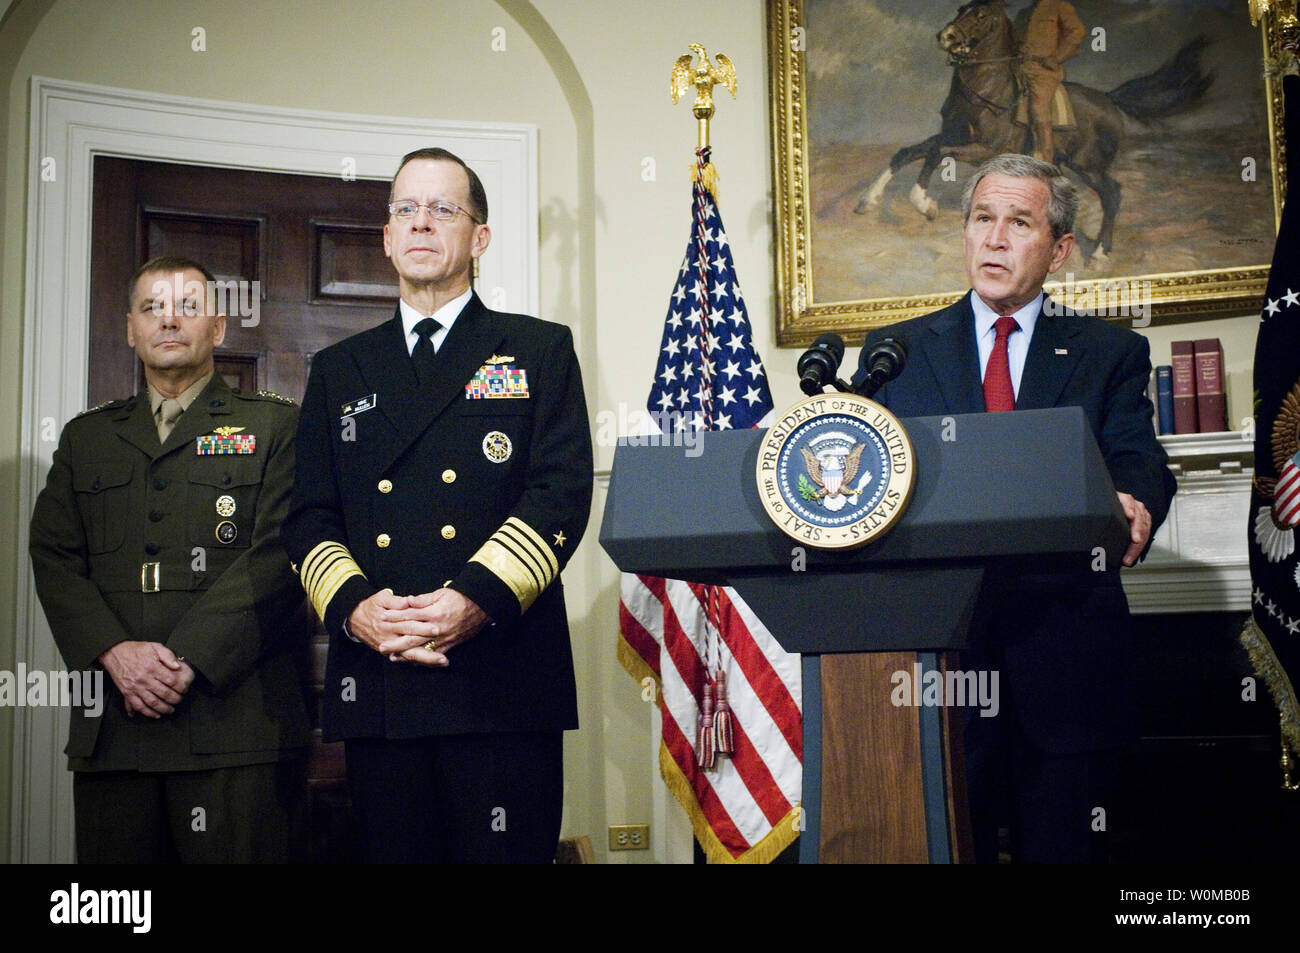 U.S. President George W. Bush announces his nomination of Chief of Naval Operations Adm. Mike Mullen (C) for Chairman of the Joint Chiefs of Staff and Commander of U.S. Strategic Command Marine Gen. James E. Cartwright as Vice Chairman of the Joint Chiefs of Staff, in the Roosevelt Room of the White House in Washington on June 28, 2007. (UPI Photo/Chad J. McNeeley/U.S. Navy) Stock Photo